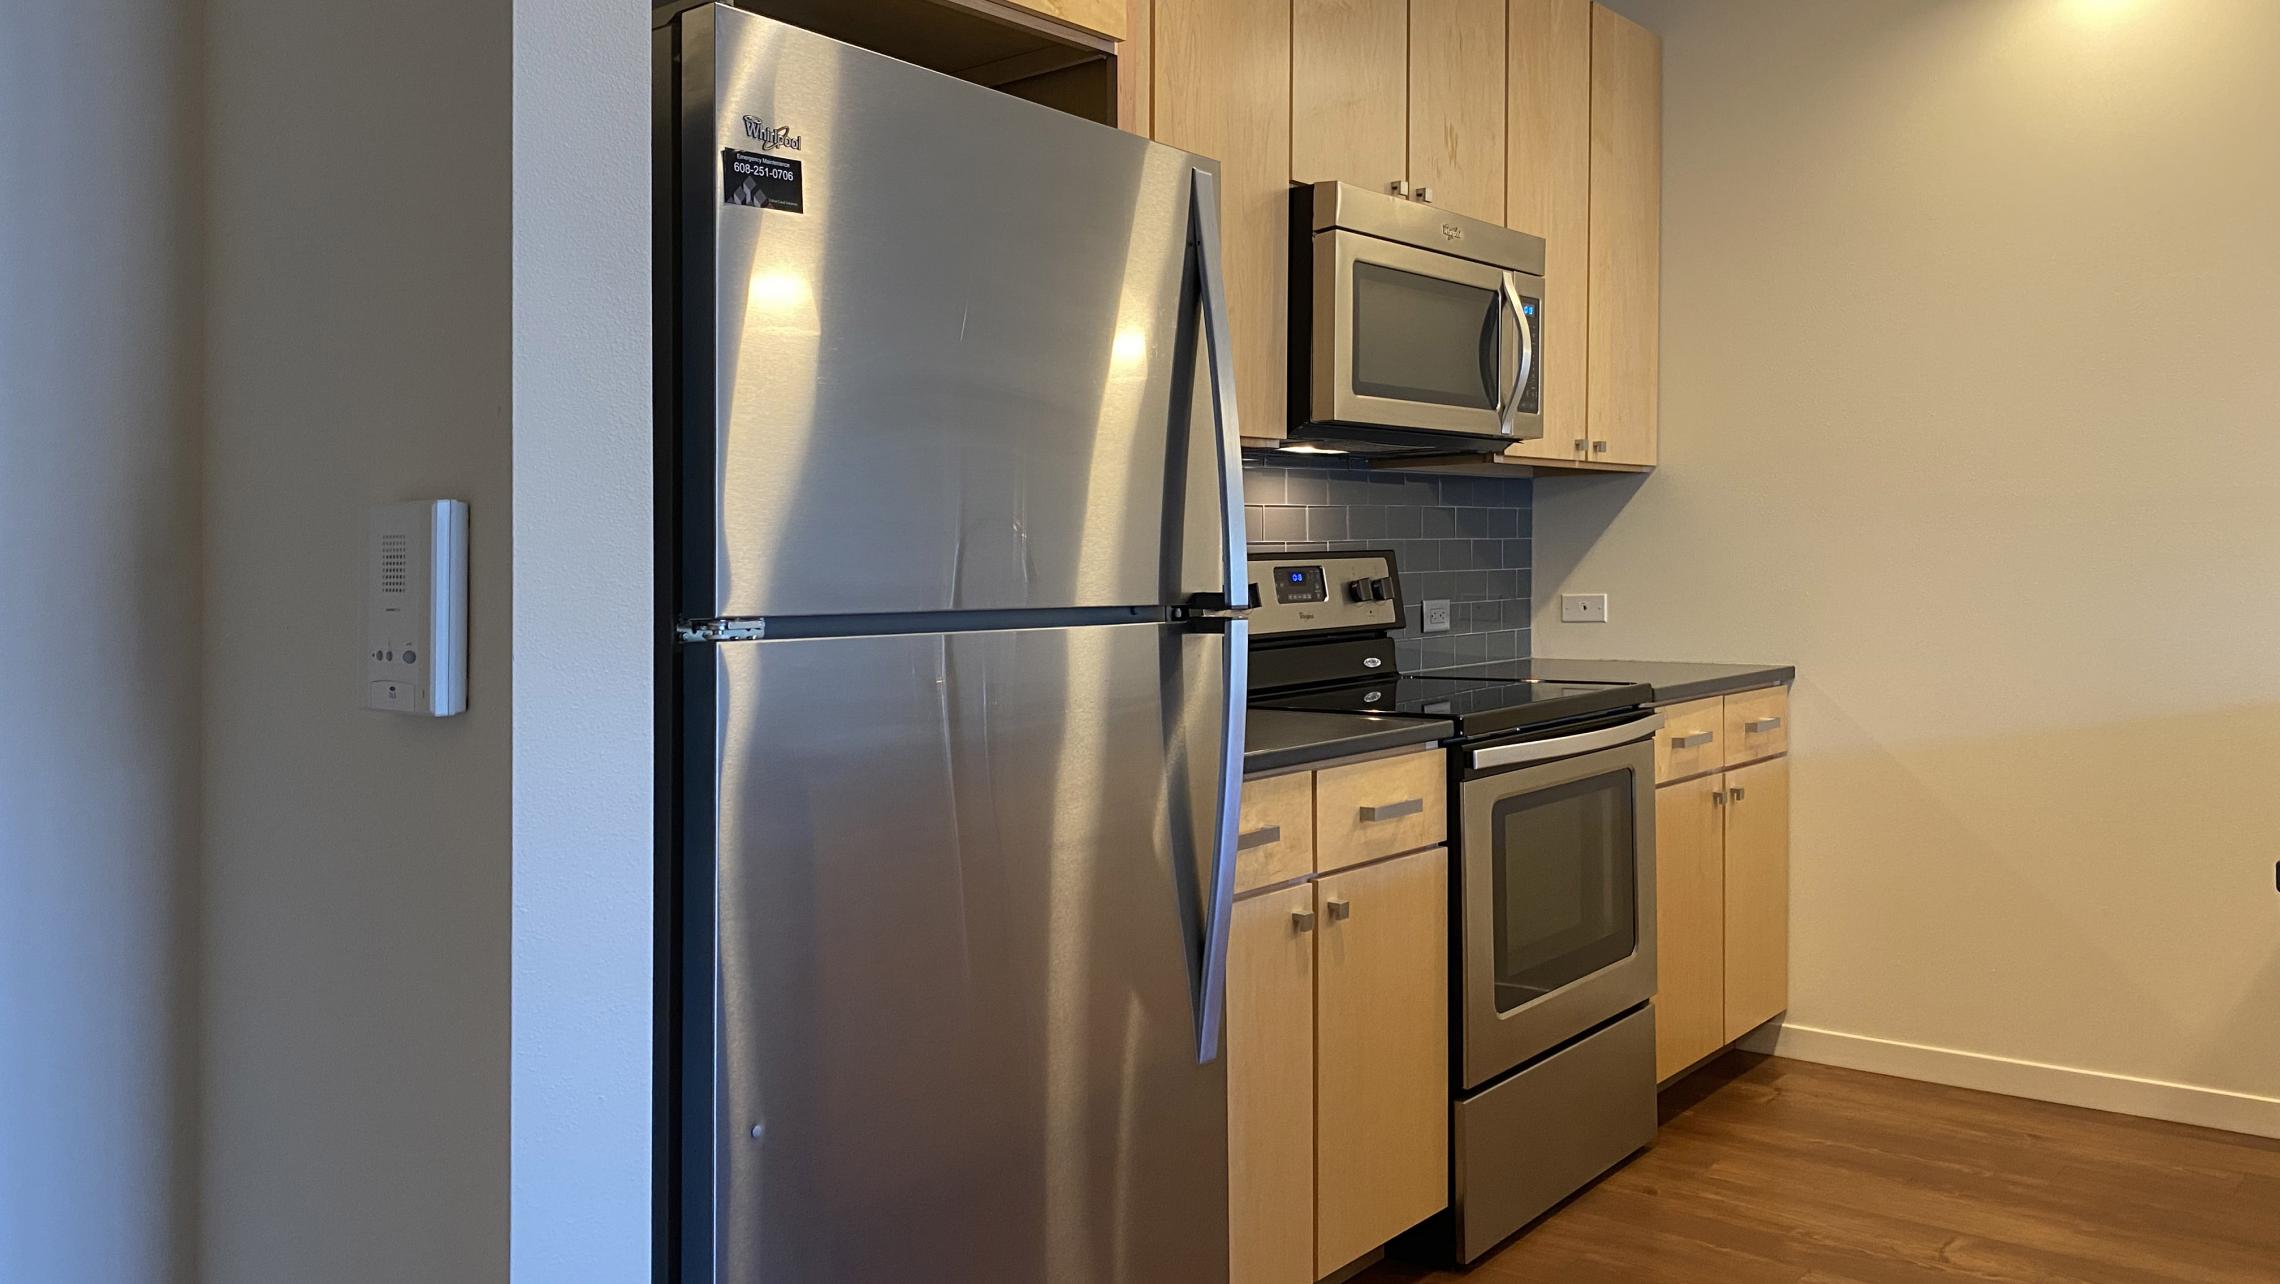 Nine-Line-at-The-Yards-Apartment-424-Two-Bedroom-Lake-View-Natural-Light-Sunny-Modern-Upscale-Designe-Luxury-Luxurious-Balcony-Views-Fitness-Lounge-Courtyard-Dogs-Cats-Bike-Trail-Downtown-Capitol